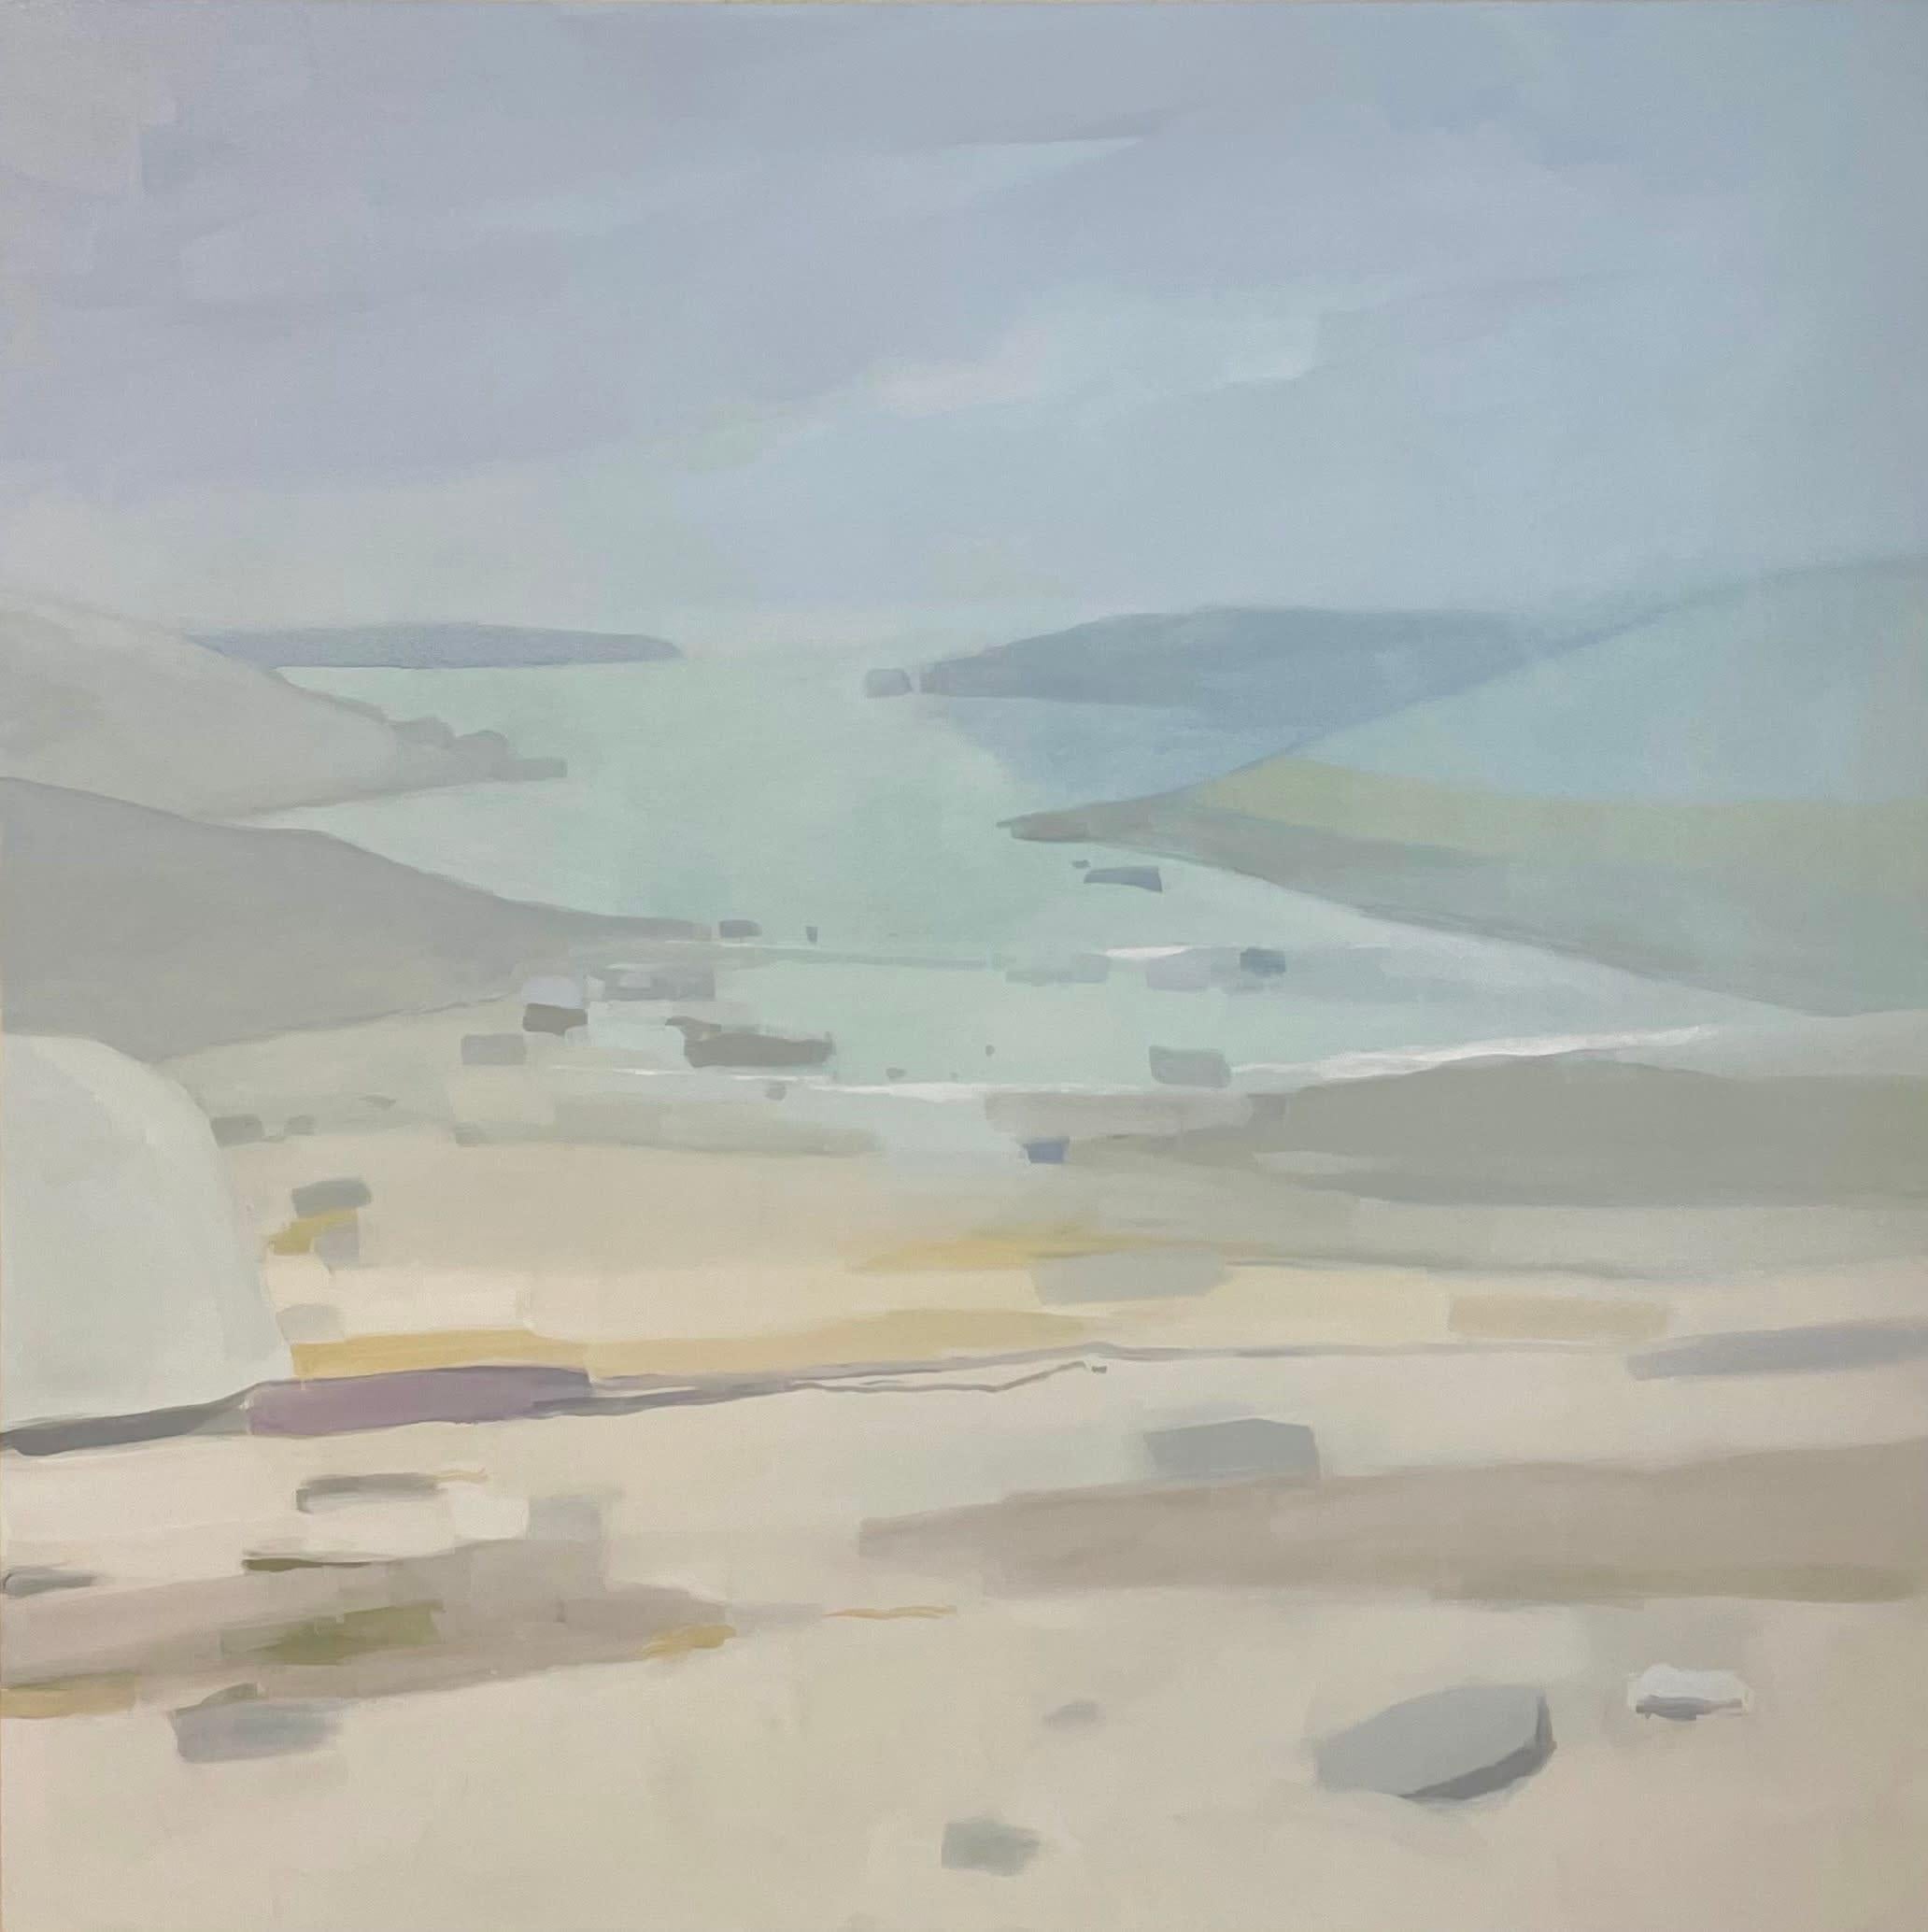 Sara MacCulloch "Beach Inlet" - Landscape Oil Painting on Canvas